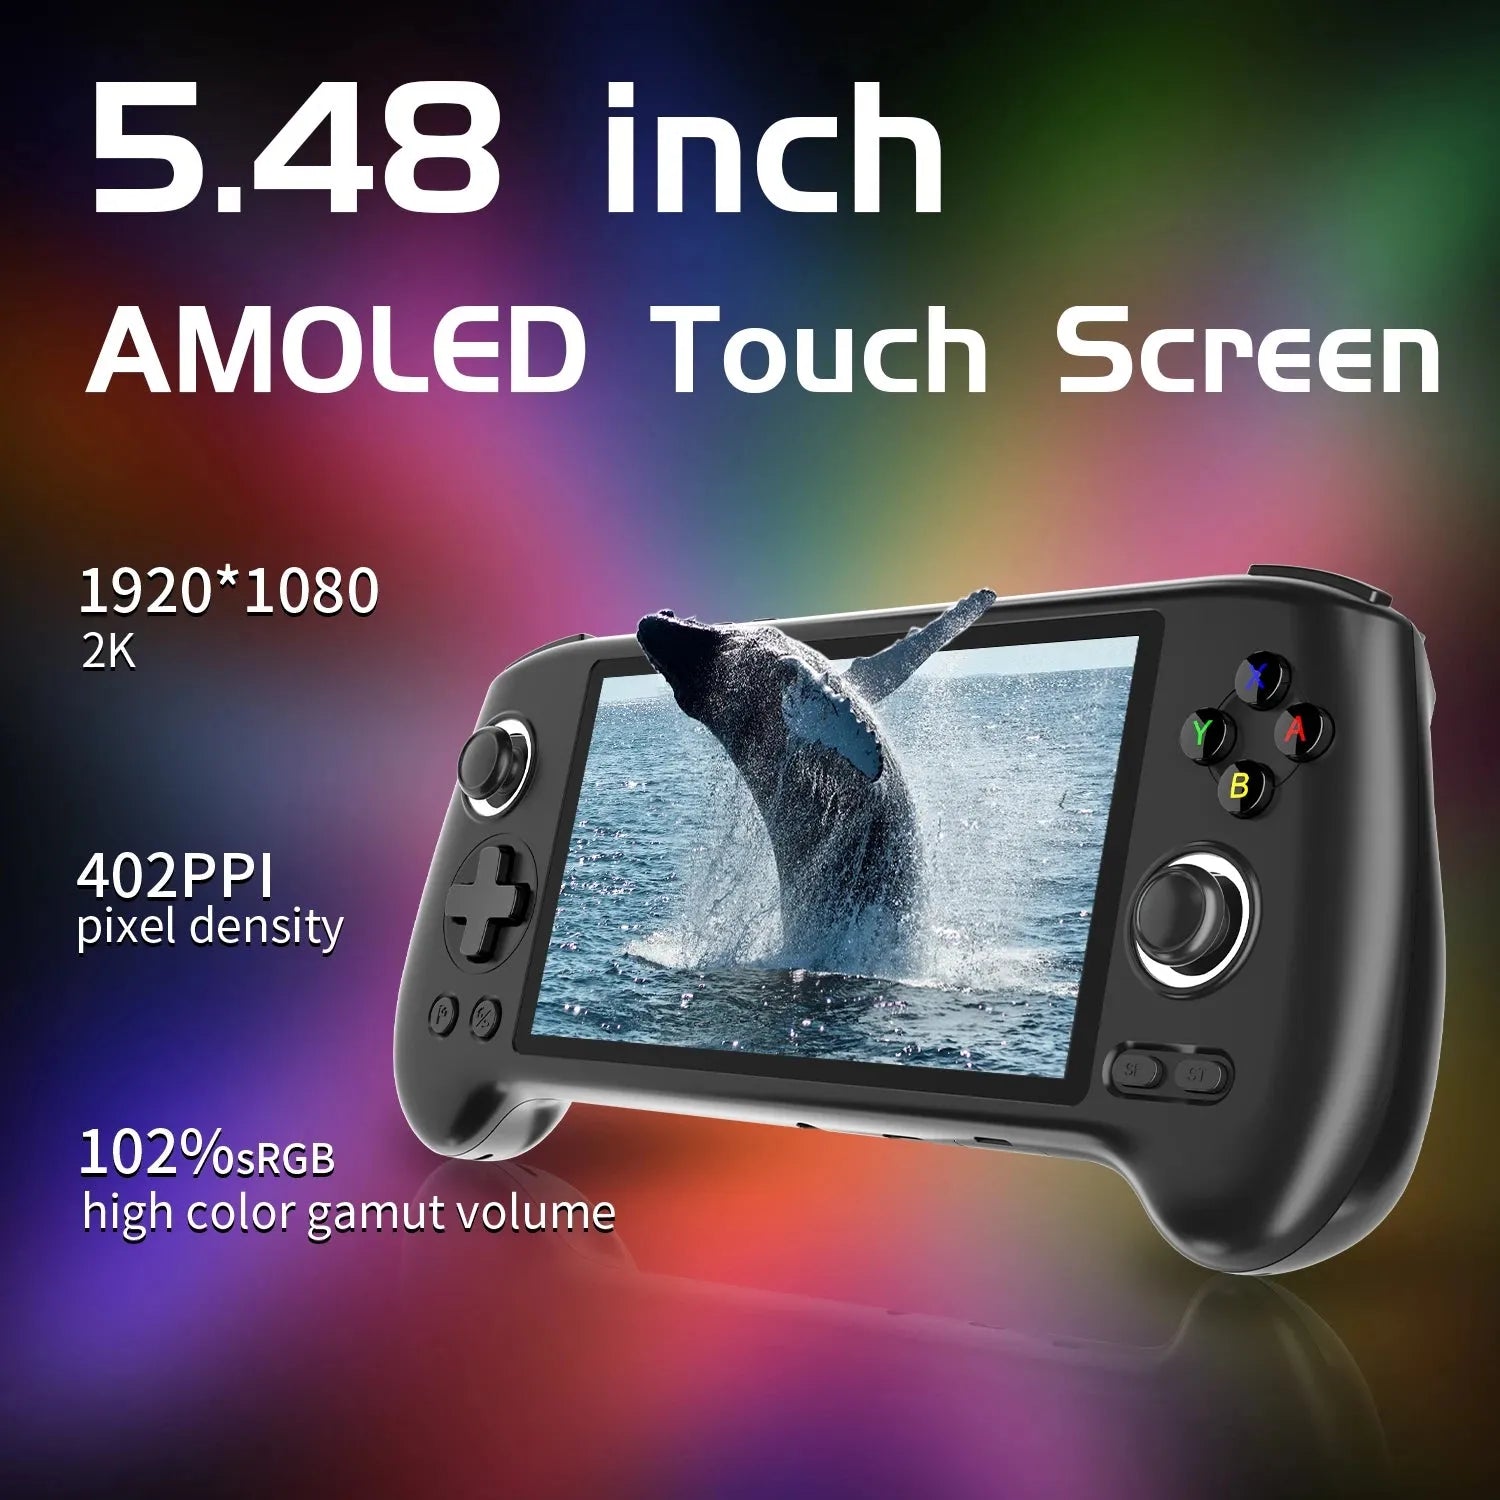 ANBERNIC RG556 Handheld Game Console Unisoc T820 Android 13 5.48 inch AMOLED Screen 5500mAh WIFI Bluetooth Retro Video Players